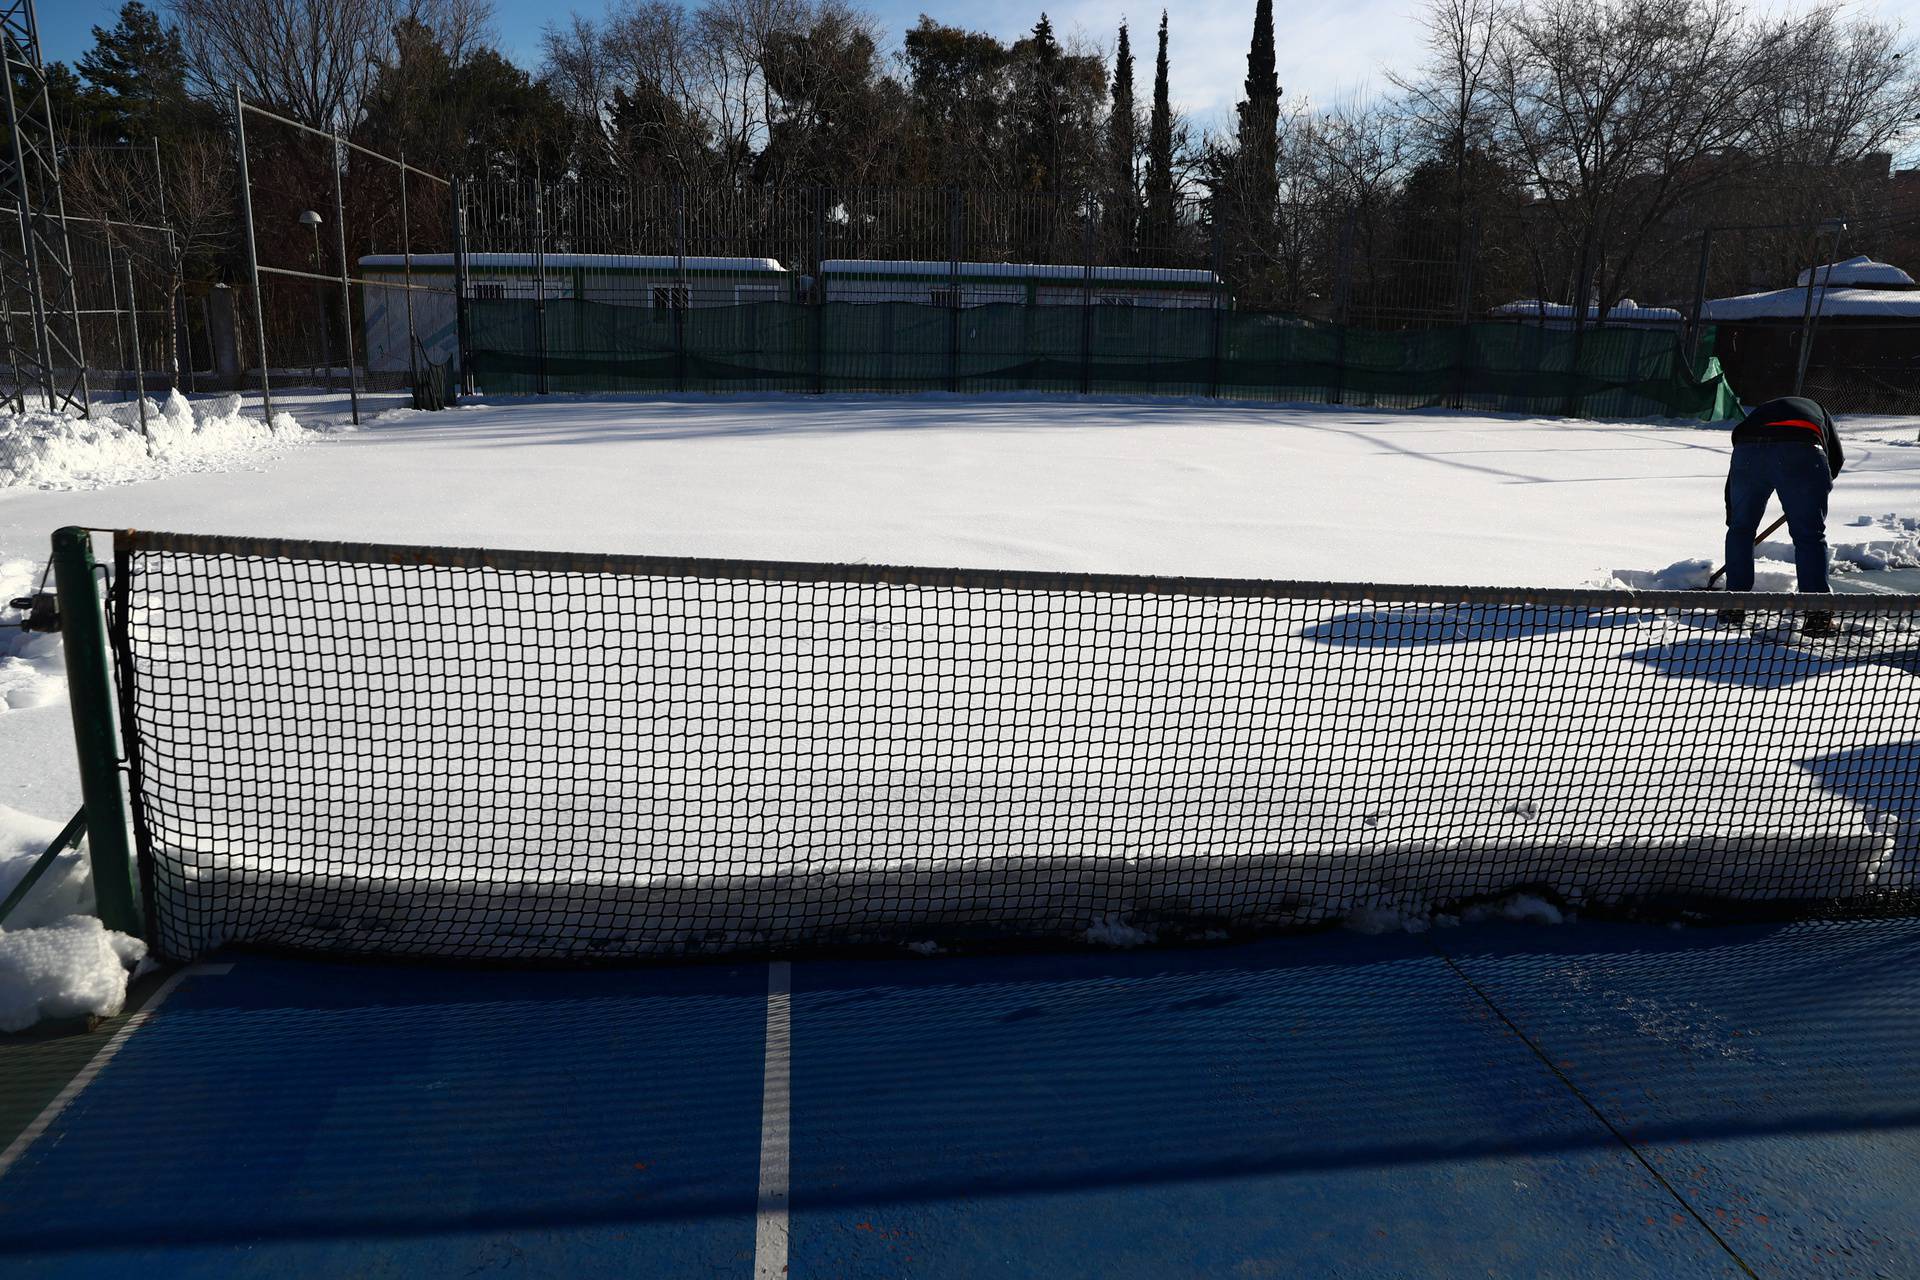 A worker cleans a municipal tennis court after a heavy snowfall in Madrid